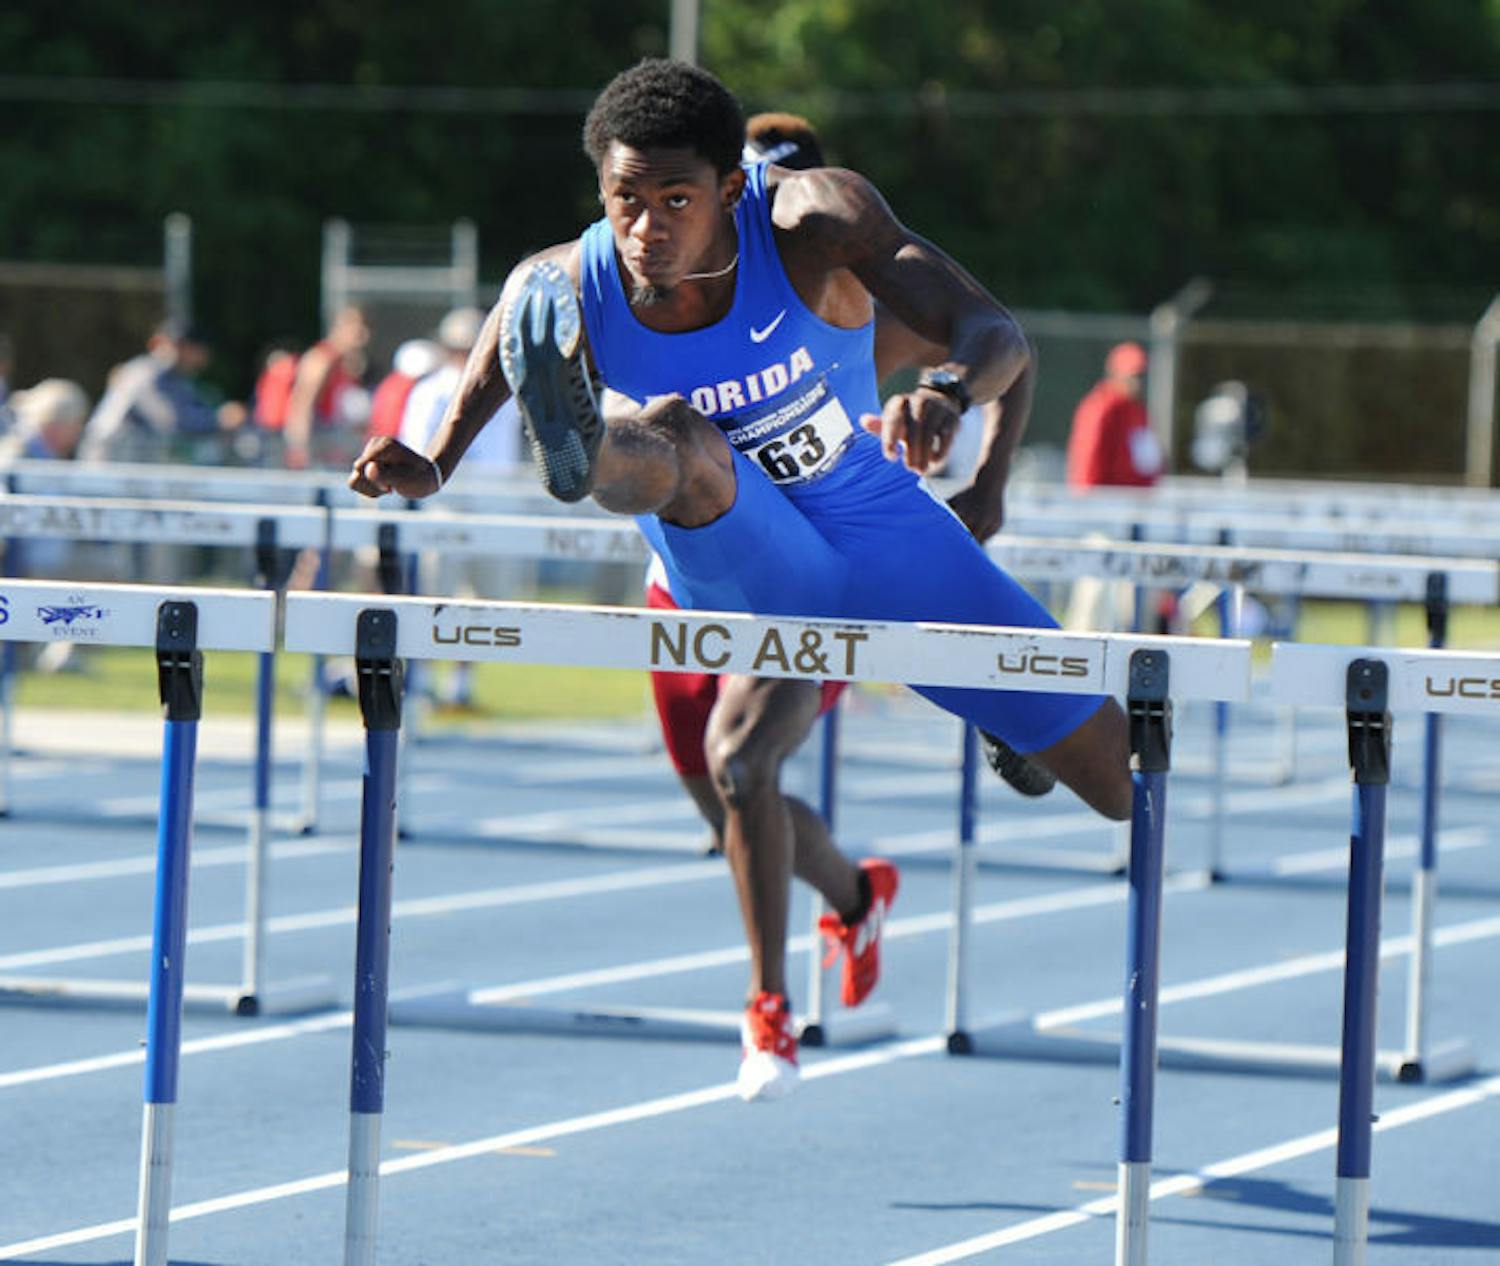 Eddie Lovett leaps over a hurdle during an NCAA East Preliminary Round in Greensboro, N.C., on May 24, 2013. Lovett has been leading the Gators in the build up to this season.